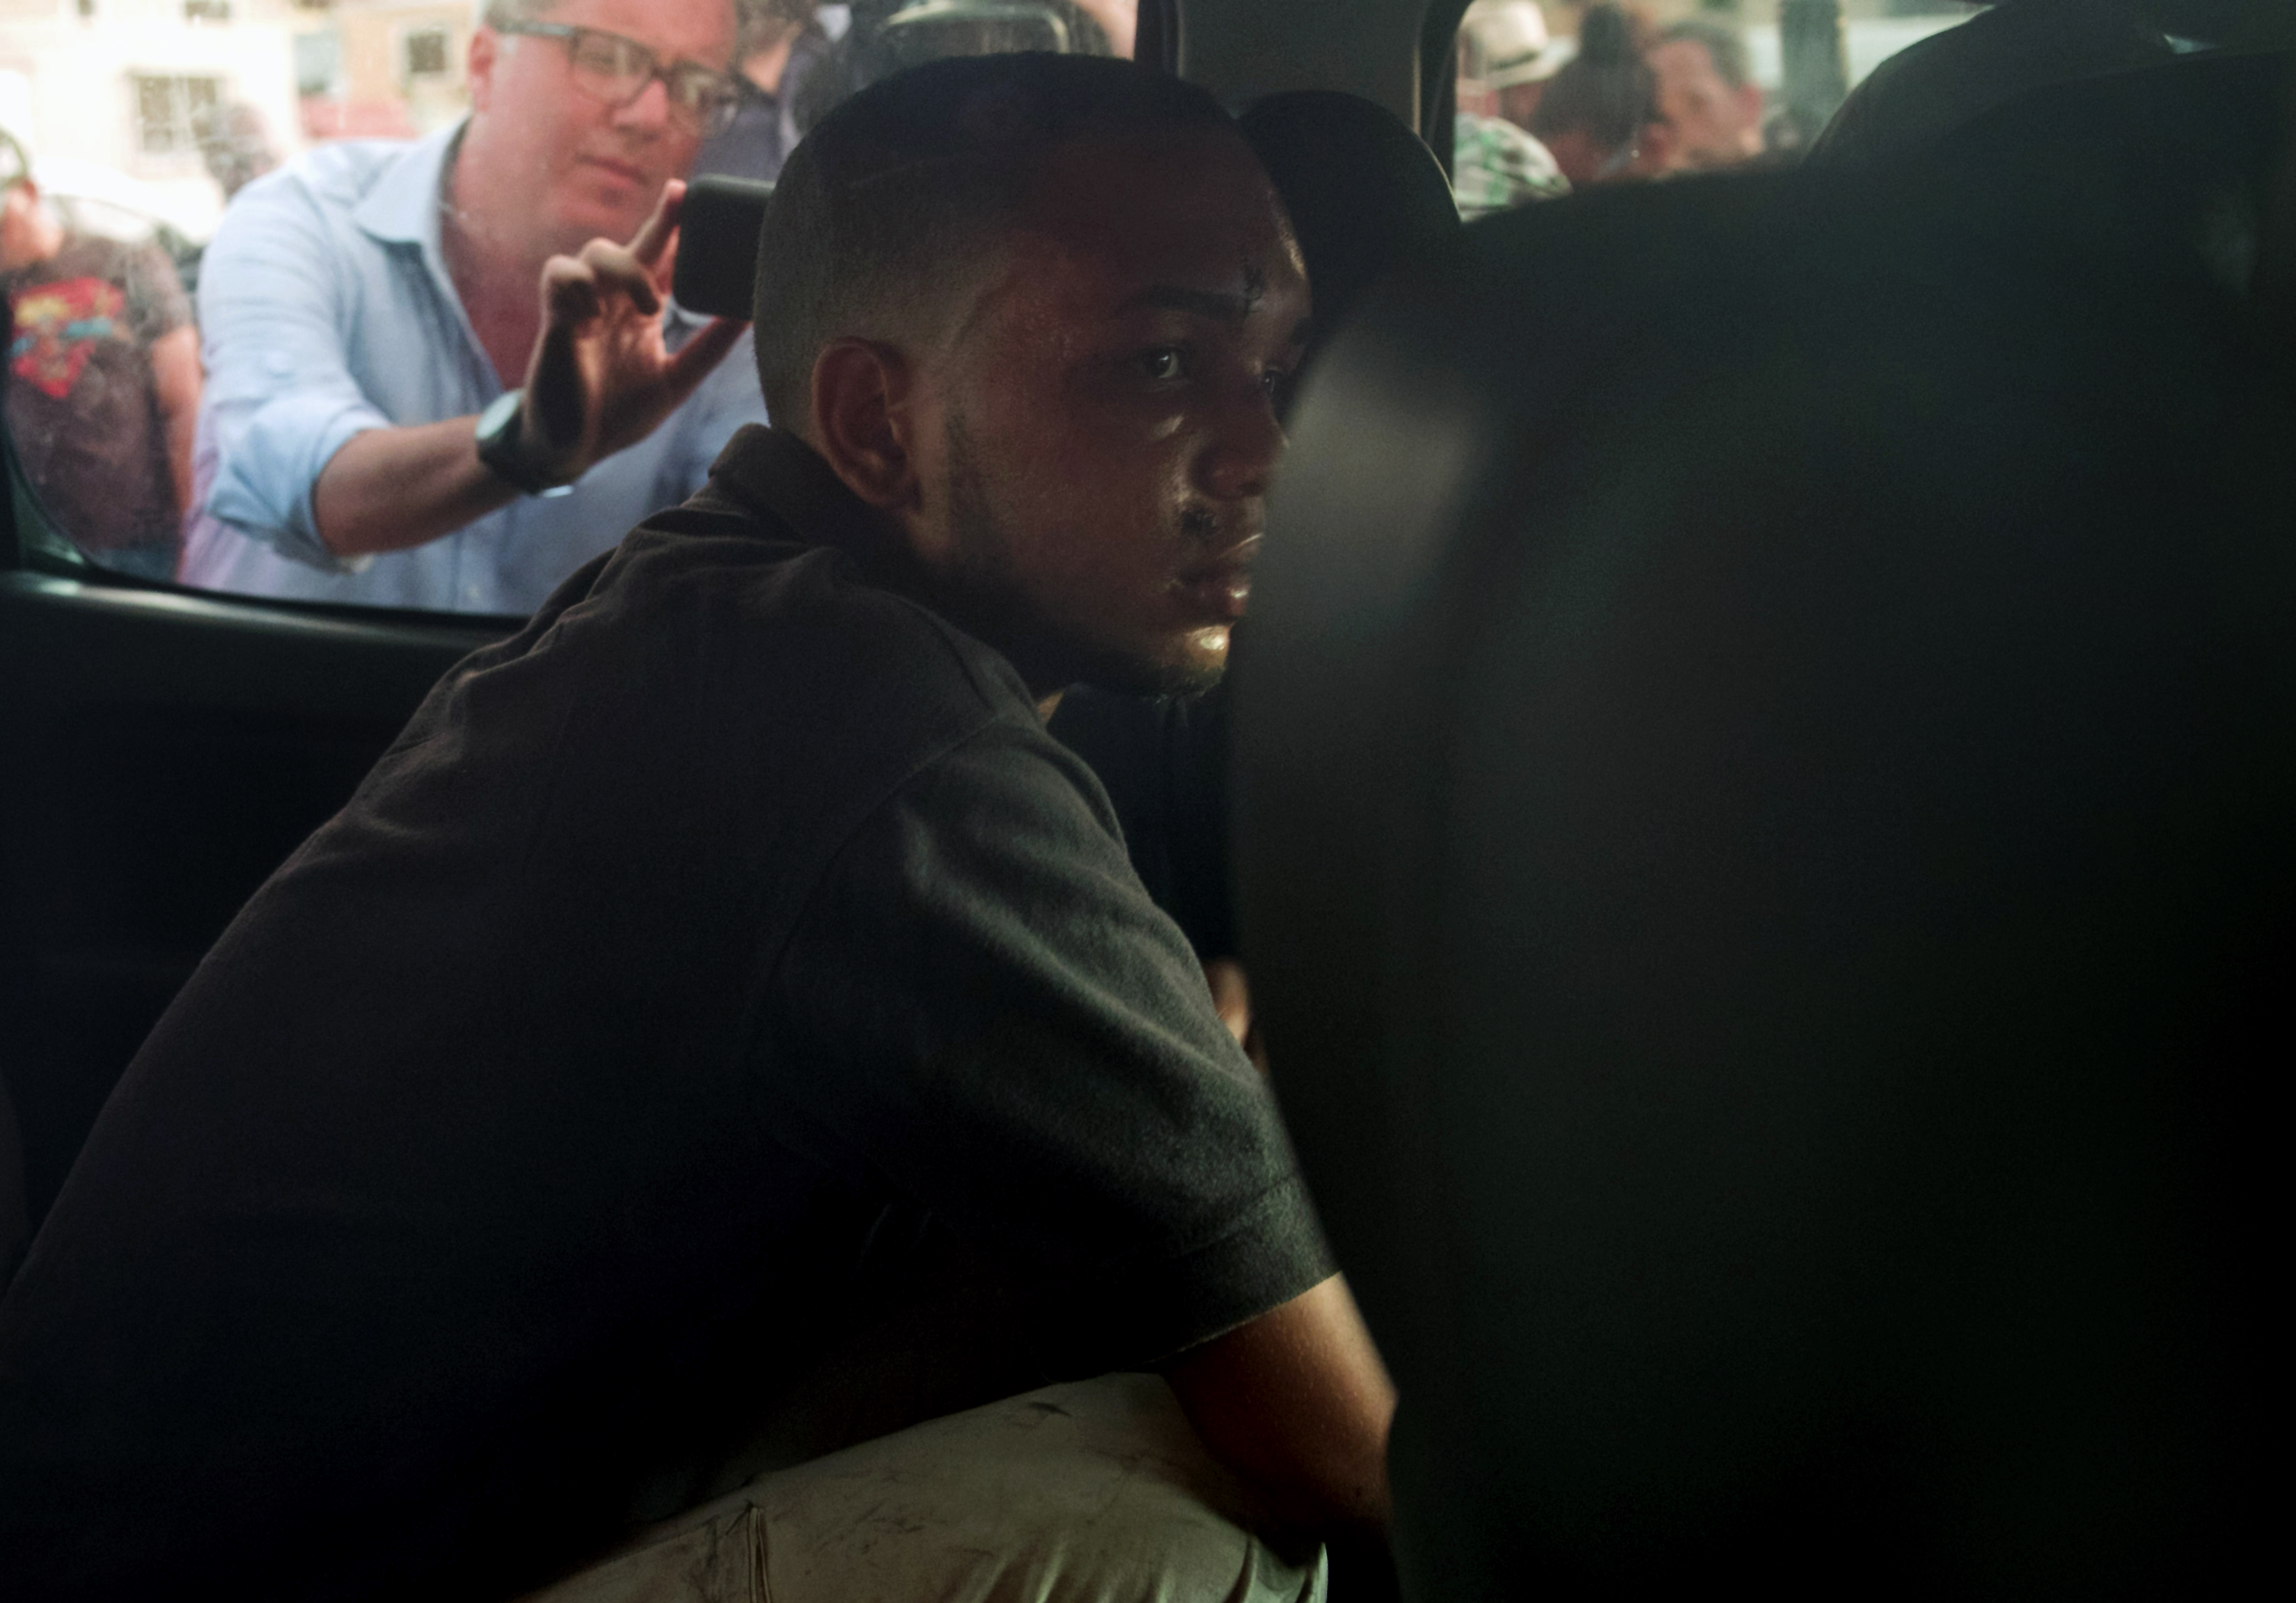 Eddy Vladimir Feliz Garcia, in custody in connection with the shooting of former Boston Red Sox slugger David Ortiz, is transferred by police to court in Santo Domingo, Dominican Republic, on June 11, 2019. (Photo credit ERIKA SANTELICES/AFP/Getty Images)